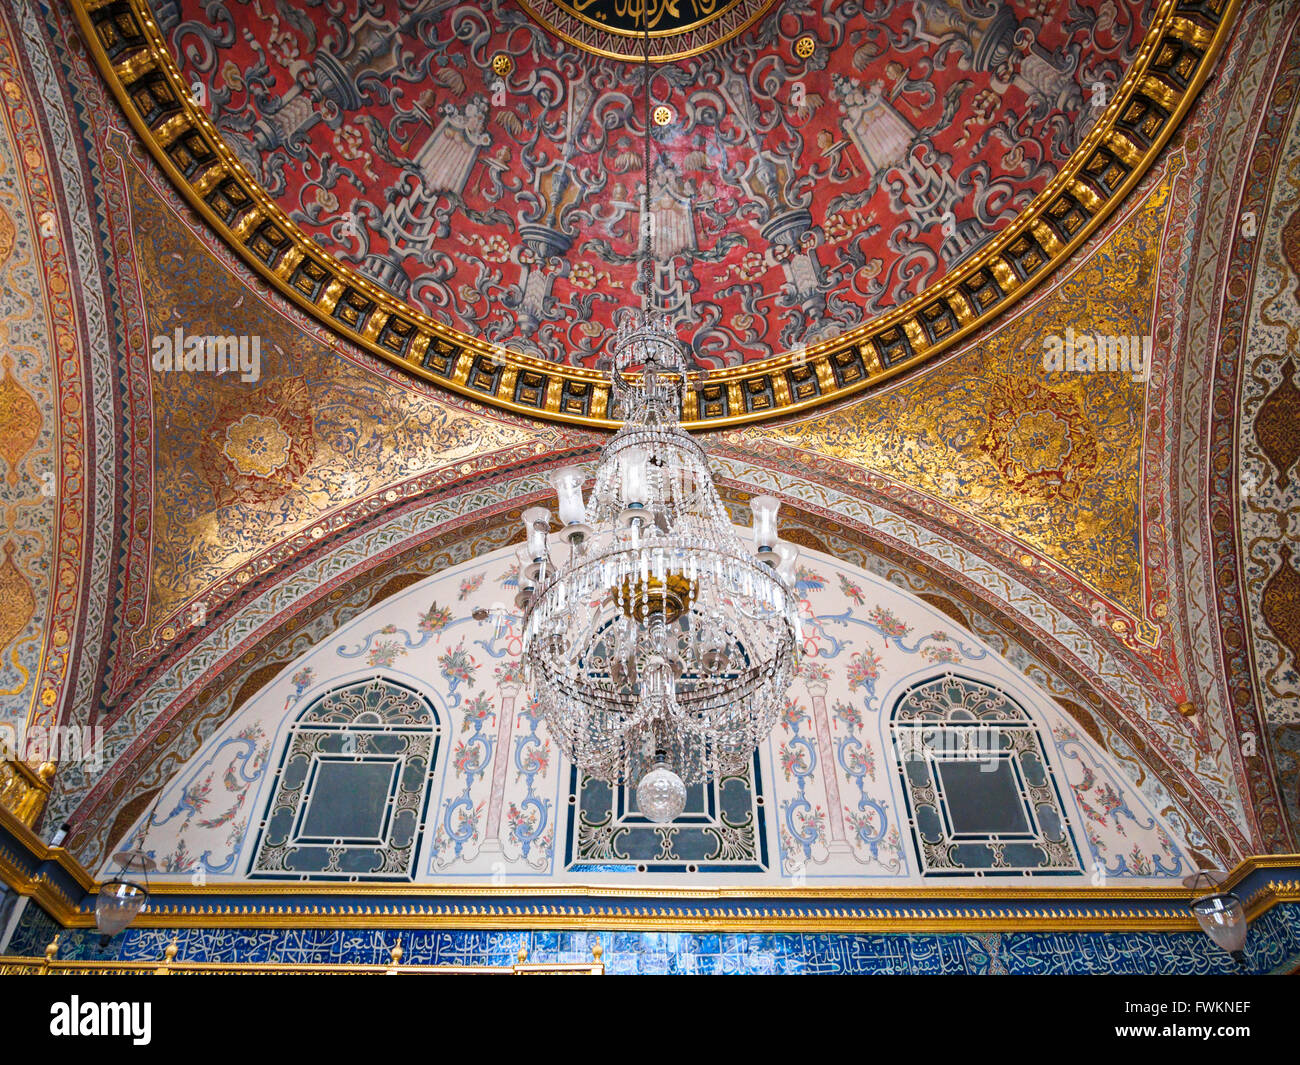 Detail of domed ceiling with chandelier in inner chamber of the Harem in Topkapi Palace (Topkapı Sarayı) in Istanbul, Turkey Stock Photo